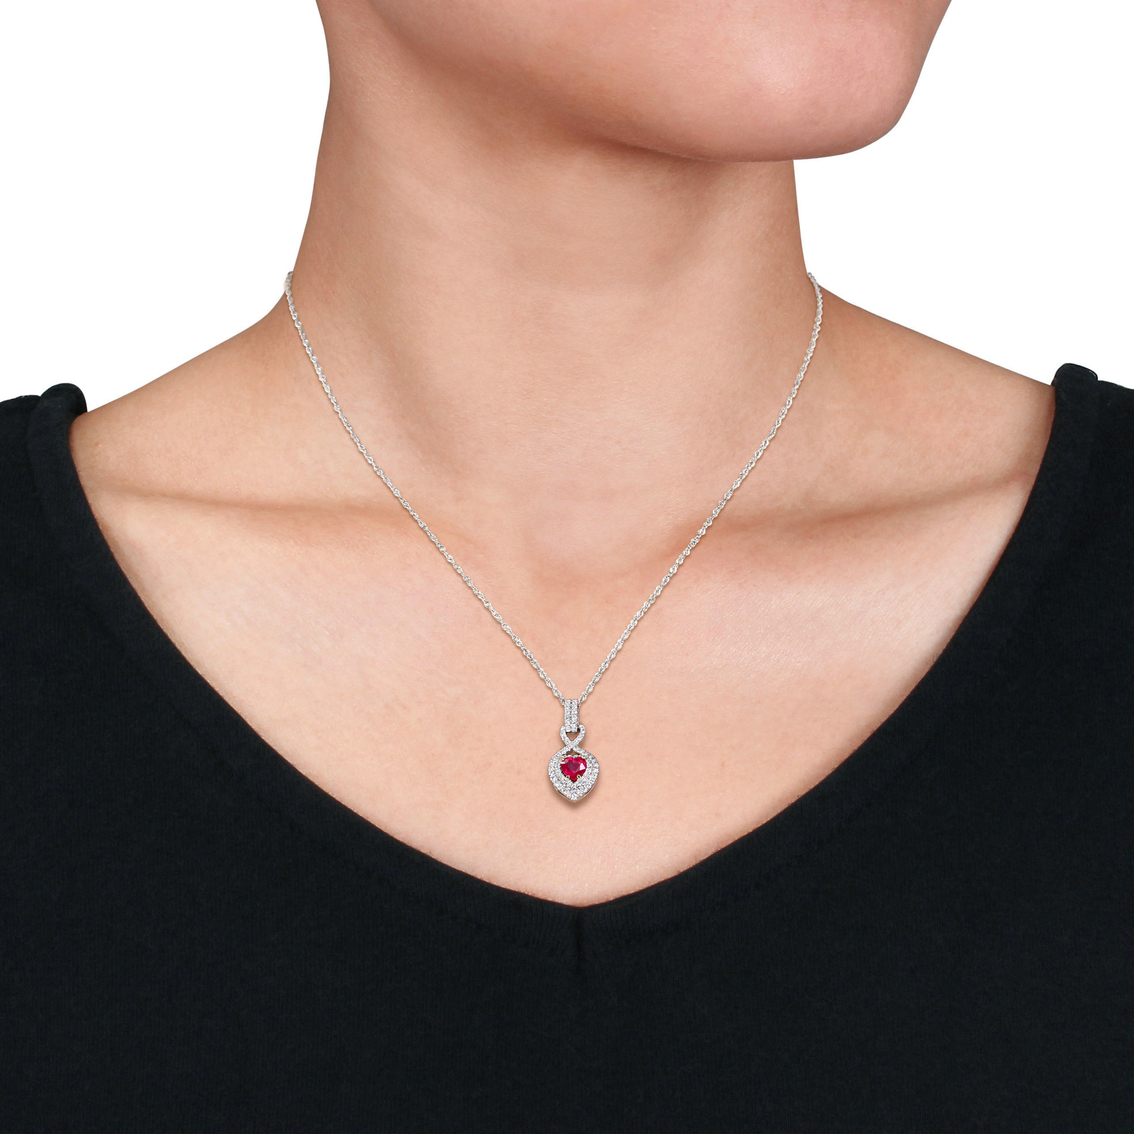 Sophia B. 14K Two Tone Gold Ruby and 1/3 CTW Diamond Infinity Heart Necklace - Image 2 of 2